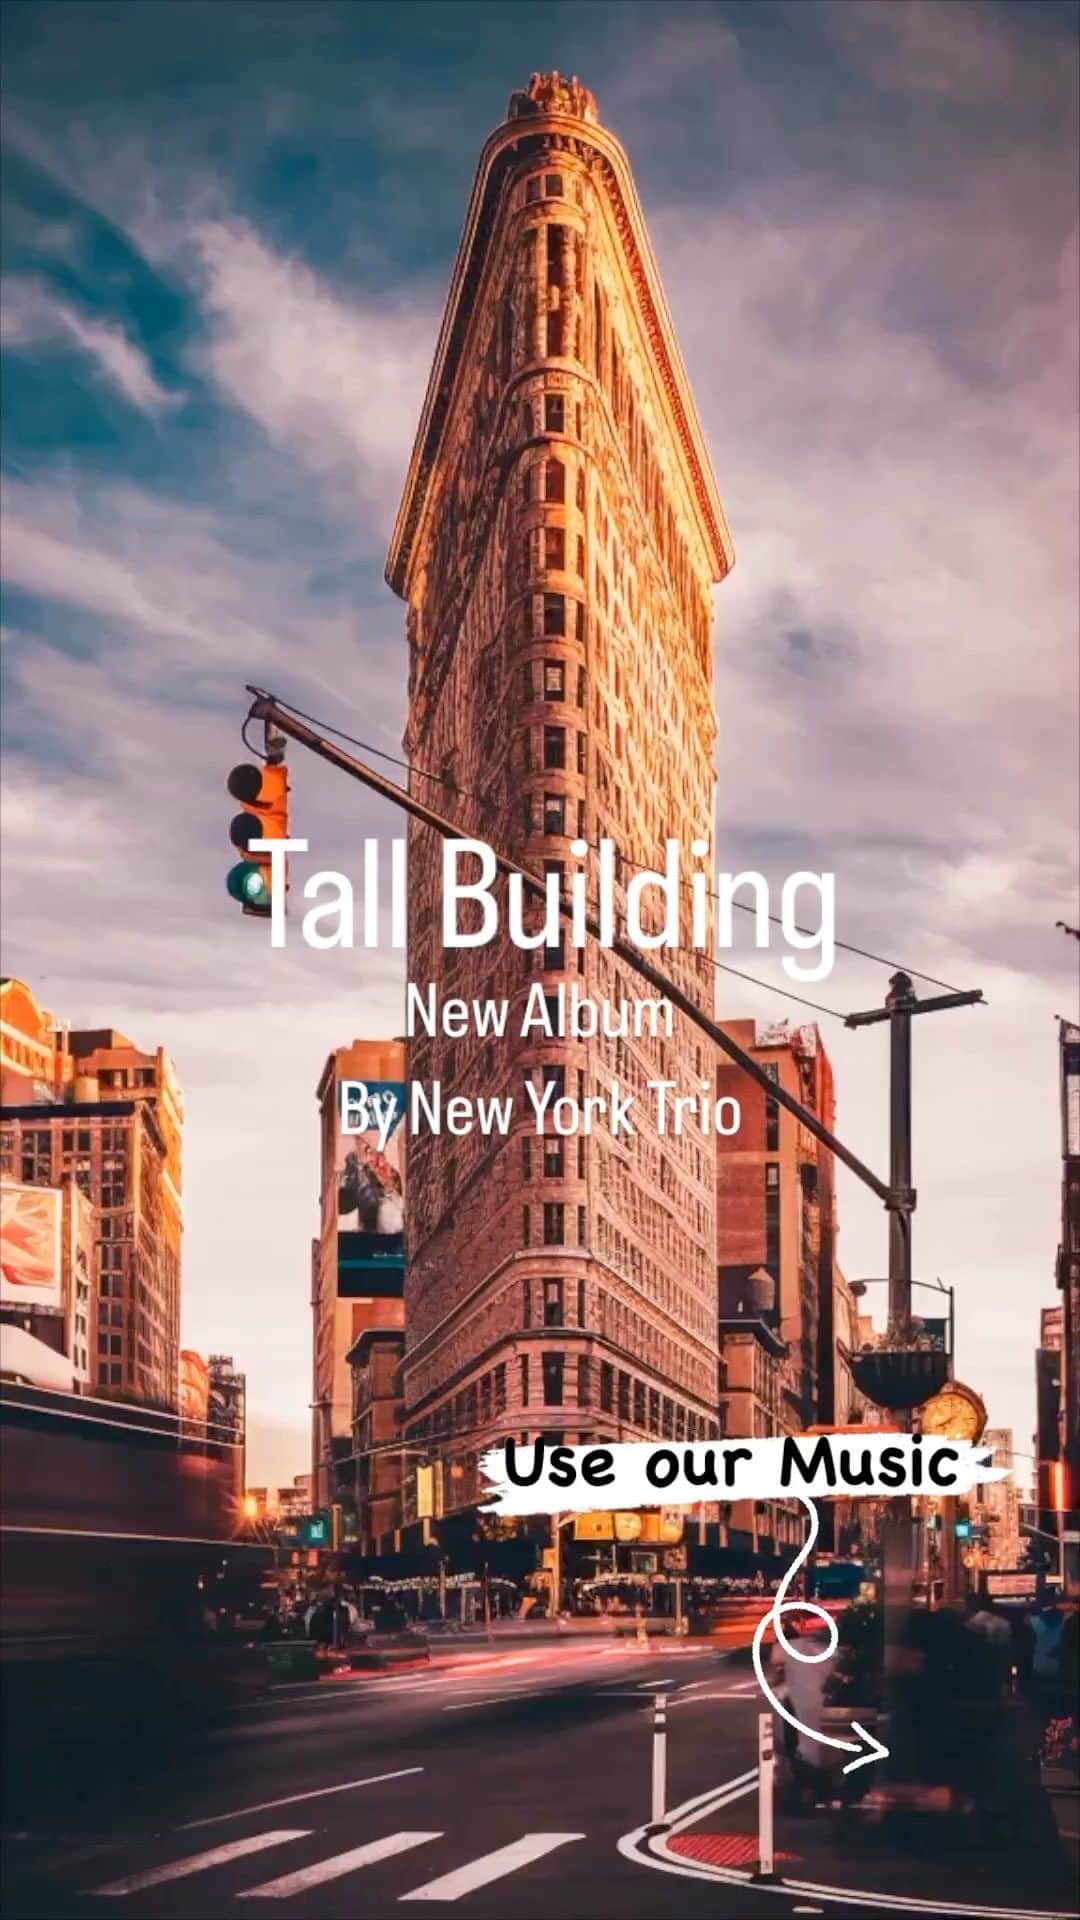 Cafe Music BGM channelのインスタグラム：「Experience 'Tall Building' by New York Trio🏙️🎶 Musical Journey to Heights #Jazz #NYTrio #NewAlbum  💿 Listen Everywhere: https://bgmc.lnk.to/Qnz7NSsc 🎵 New York Trio: https://bgmc.lnk.to/I9d3vR4Y  ／ 🎂 New Release ＼ November 3rd In Stores 🎧 Tall Building By New York Trio  #EverydayMusic #NewYorkTrio #TallBuilding #JazzJourney #SkylineSounds #NewMusicRelease #MusicalHeights #NYJazzVibes」